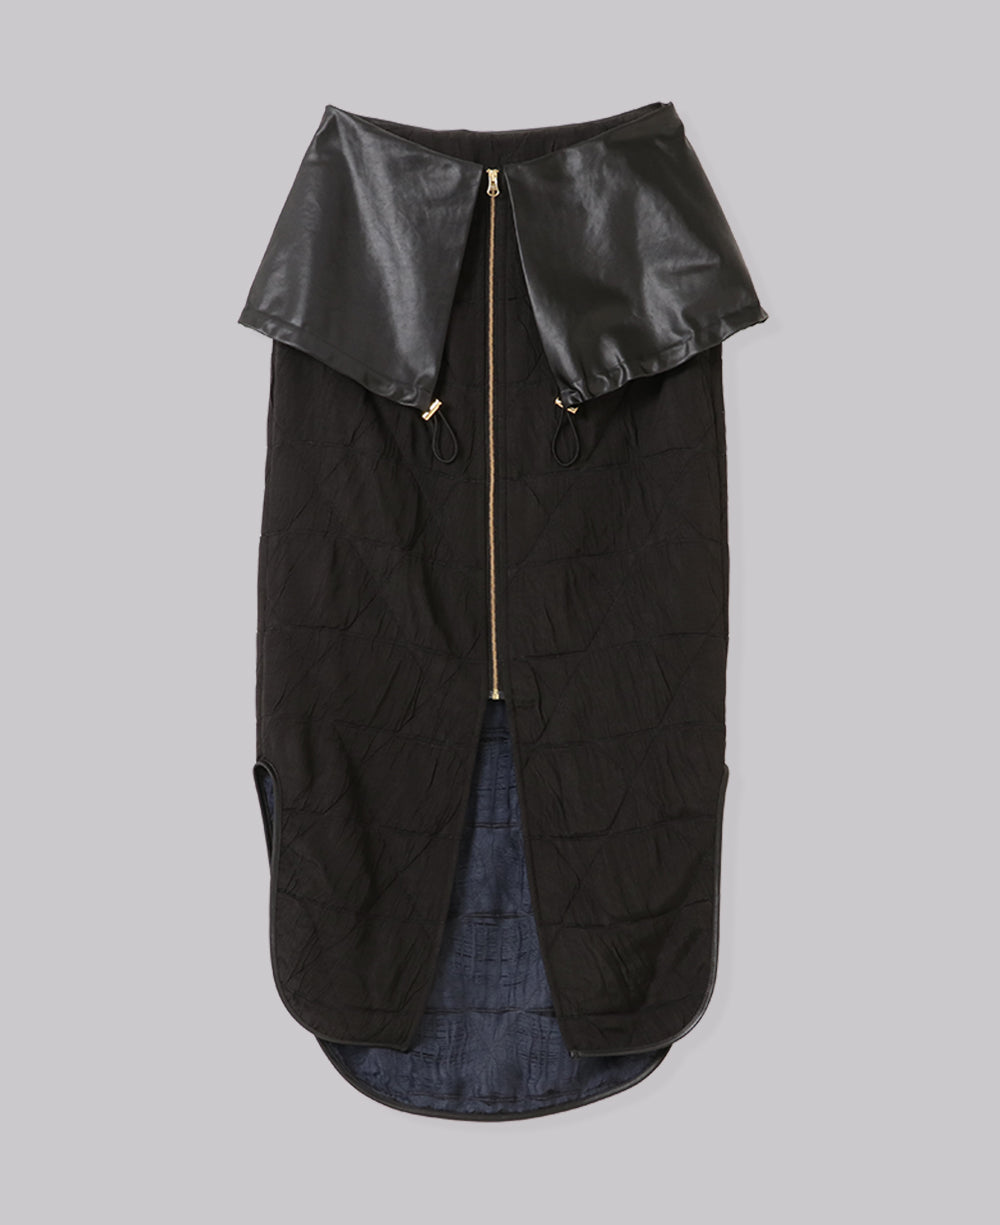 CONFLICTING FRONT ZIP SKIRT ai mitoma 新品-silversky-lifesciences.com